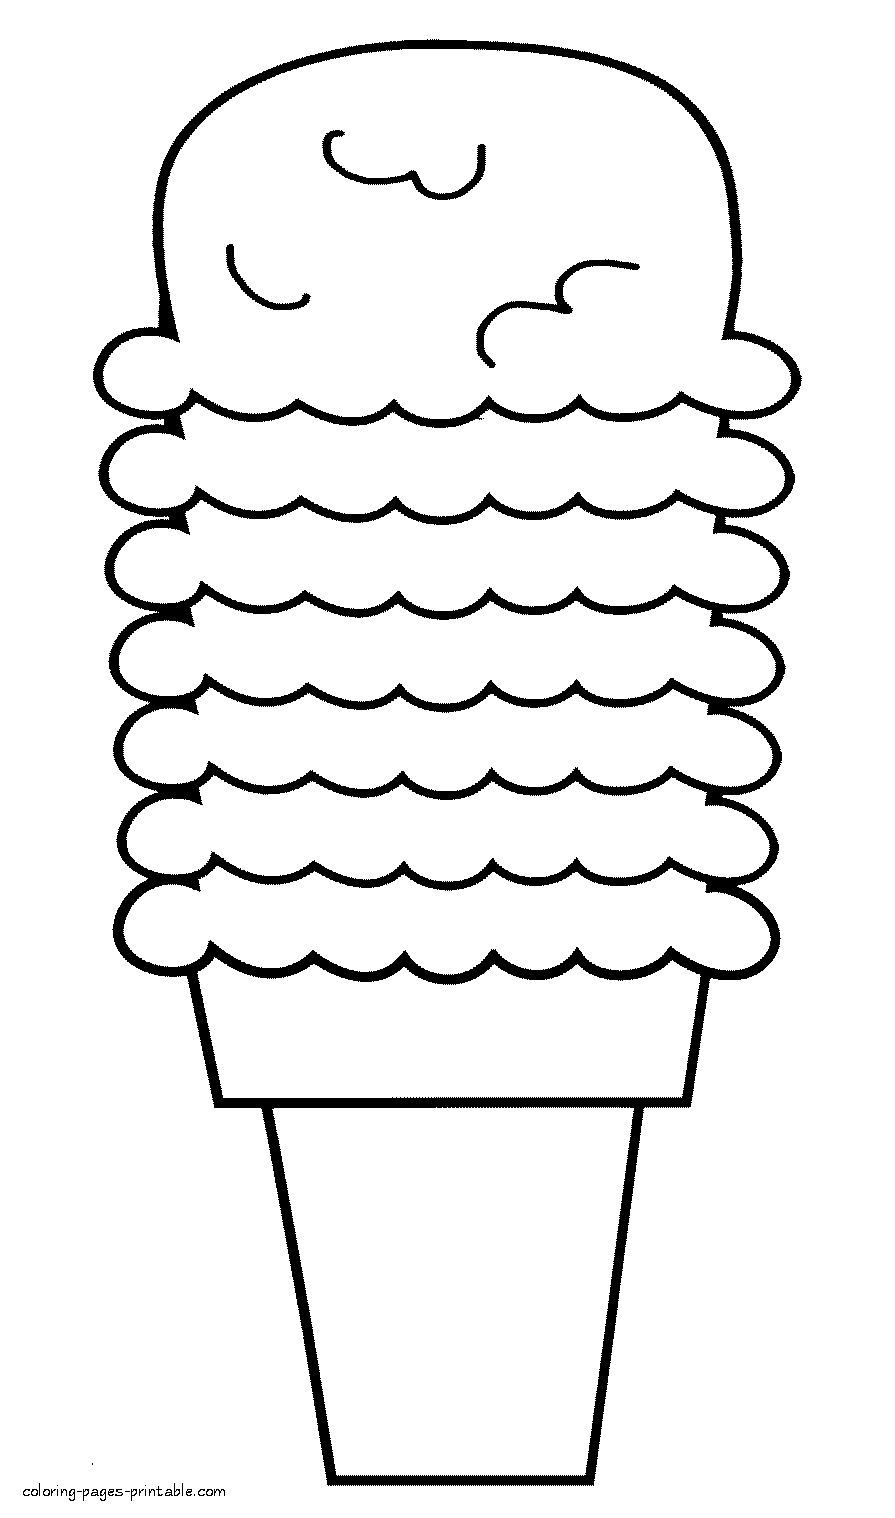 Download Colouring Pages Of Ice Cream Coloring Pages Printable Com